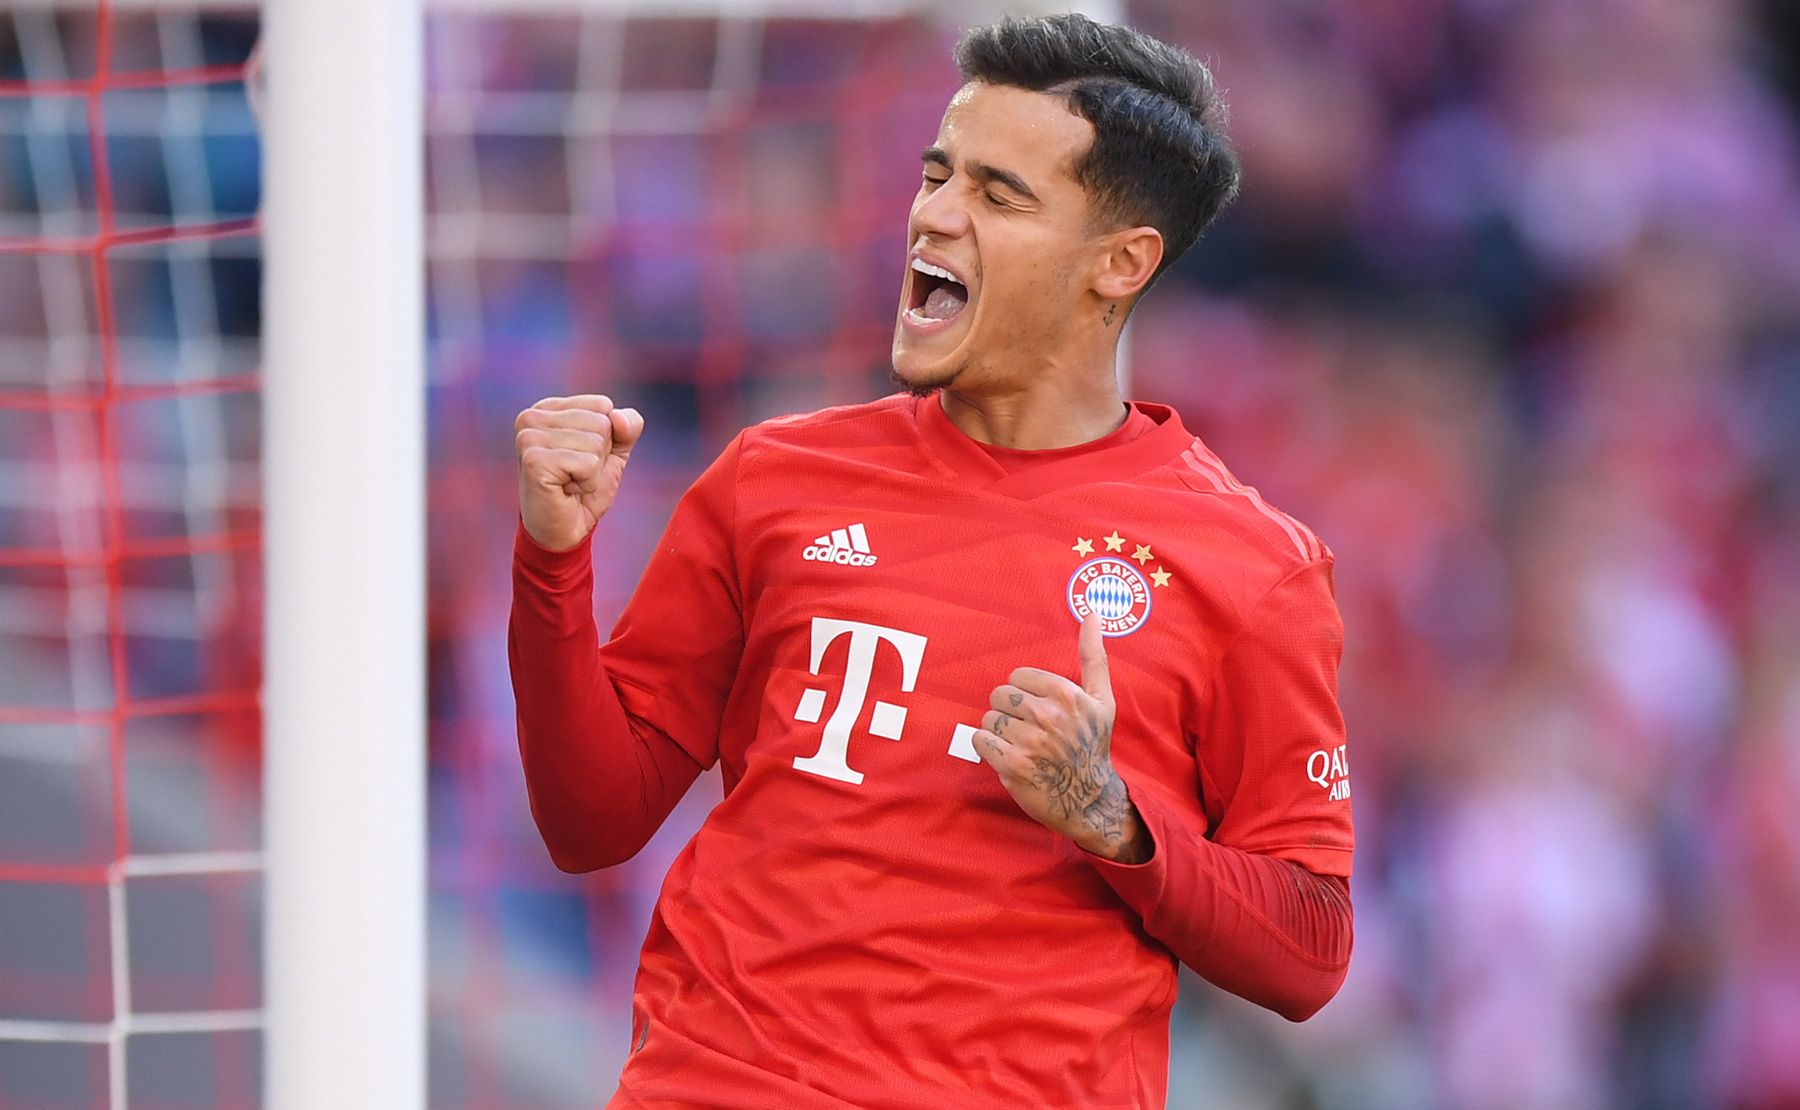 Coutinho Celebrates his goal with the Bayern